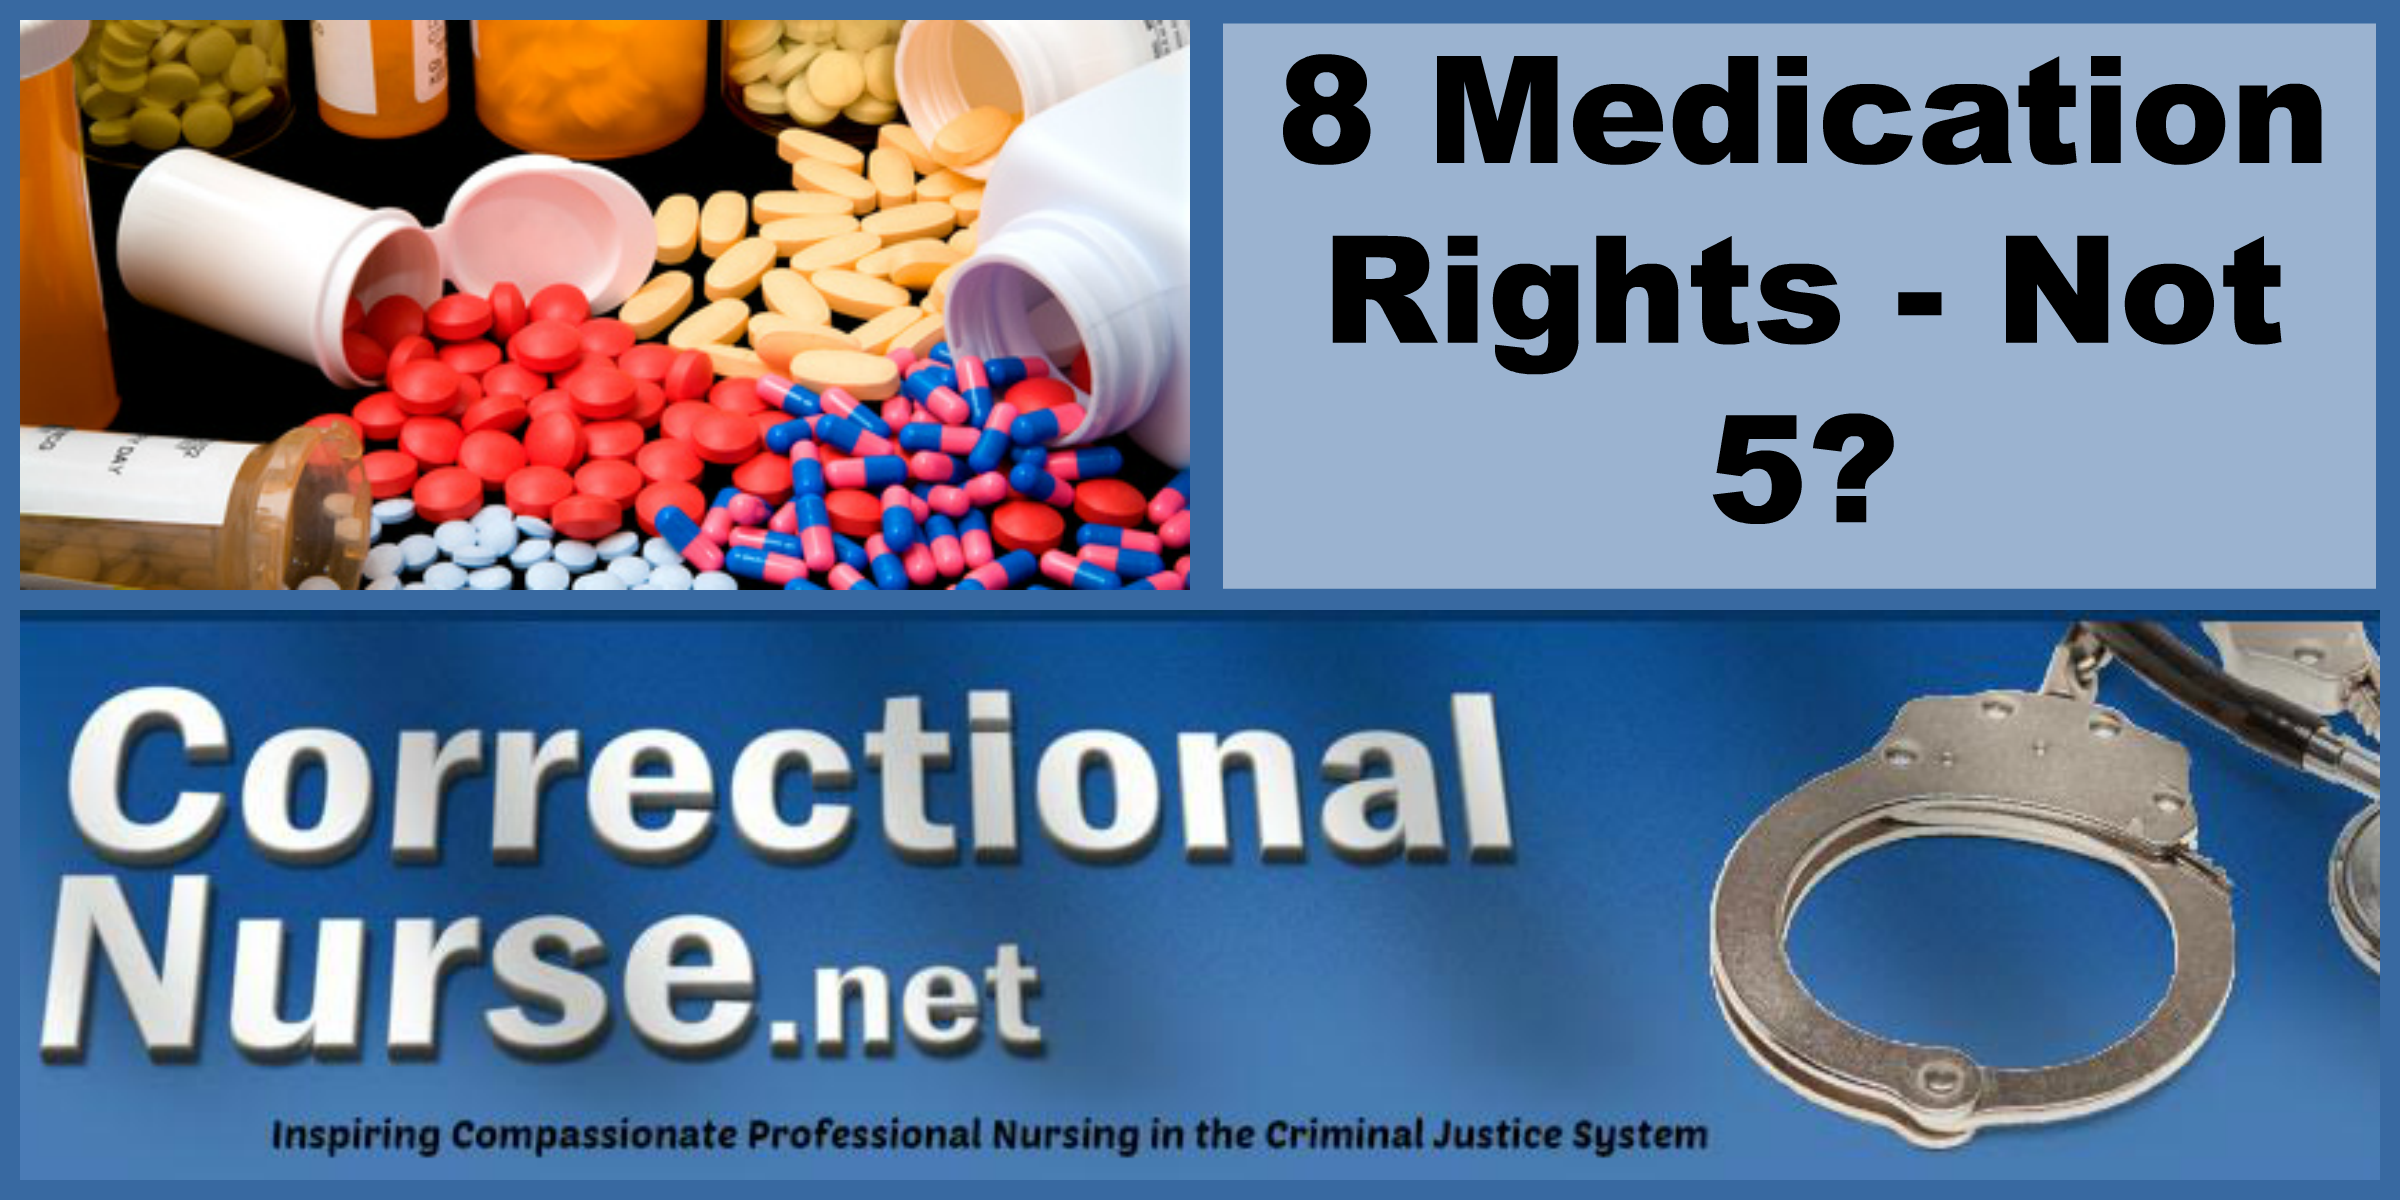 The well-known 5 medication rights administration, some experts have added 3 more to the list. There are 8 medication rights, not 5?